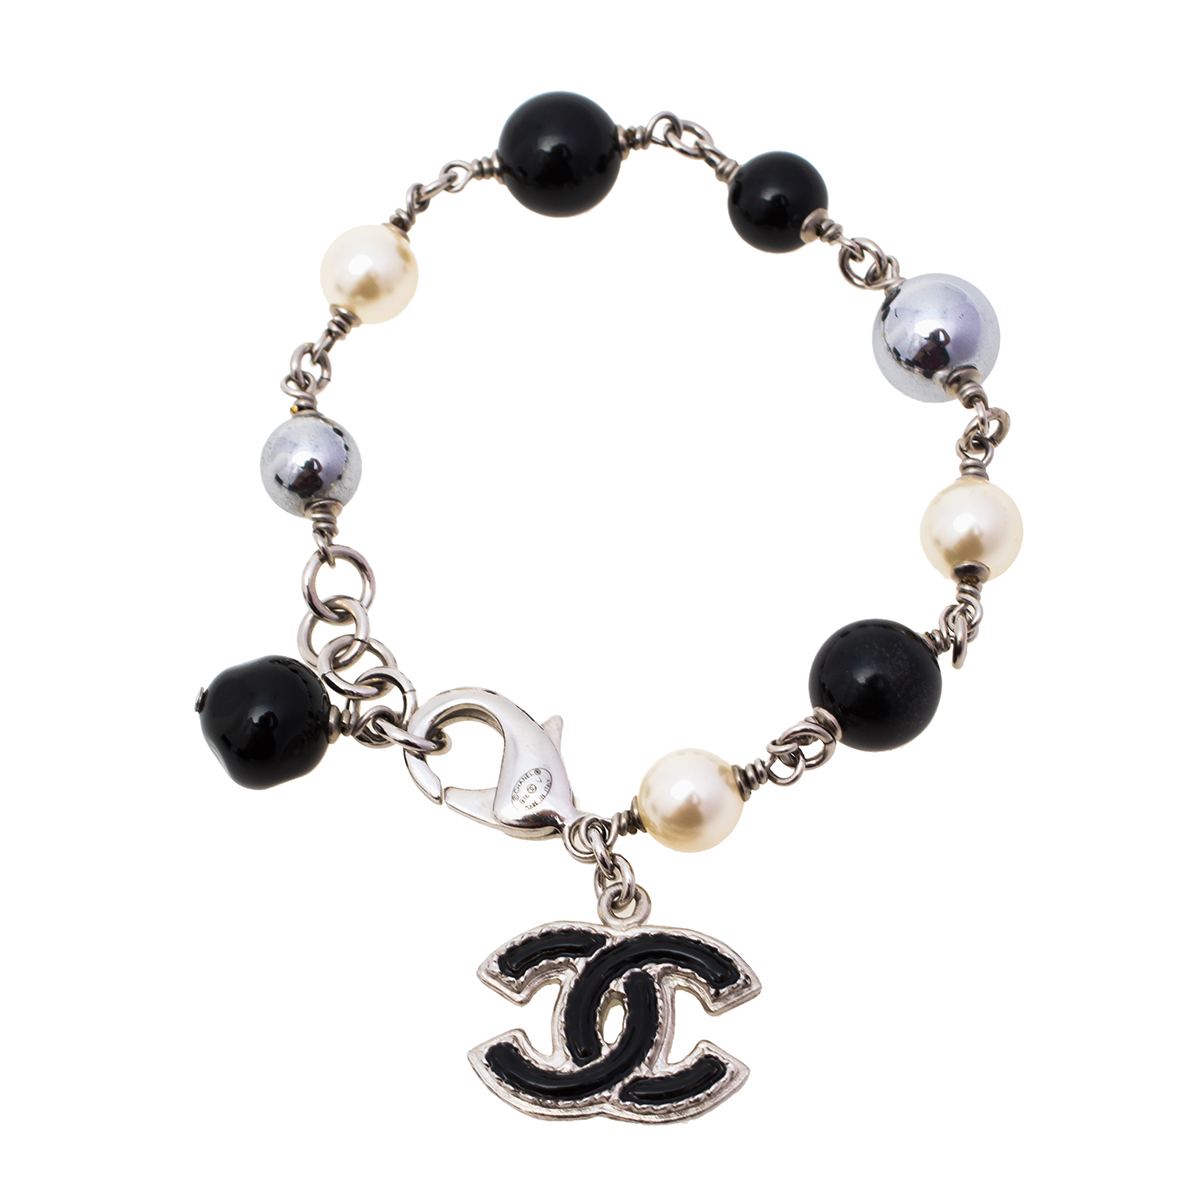 Pre-owned Chanel Faux Pearl Silver Tone Beaded Cc Charm Bracelet